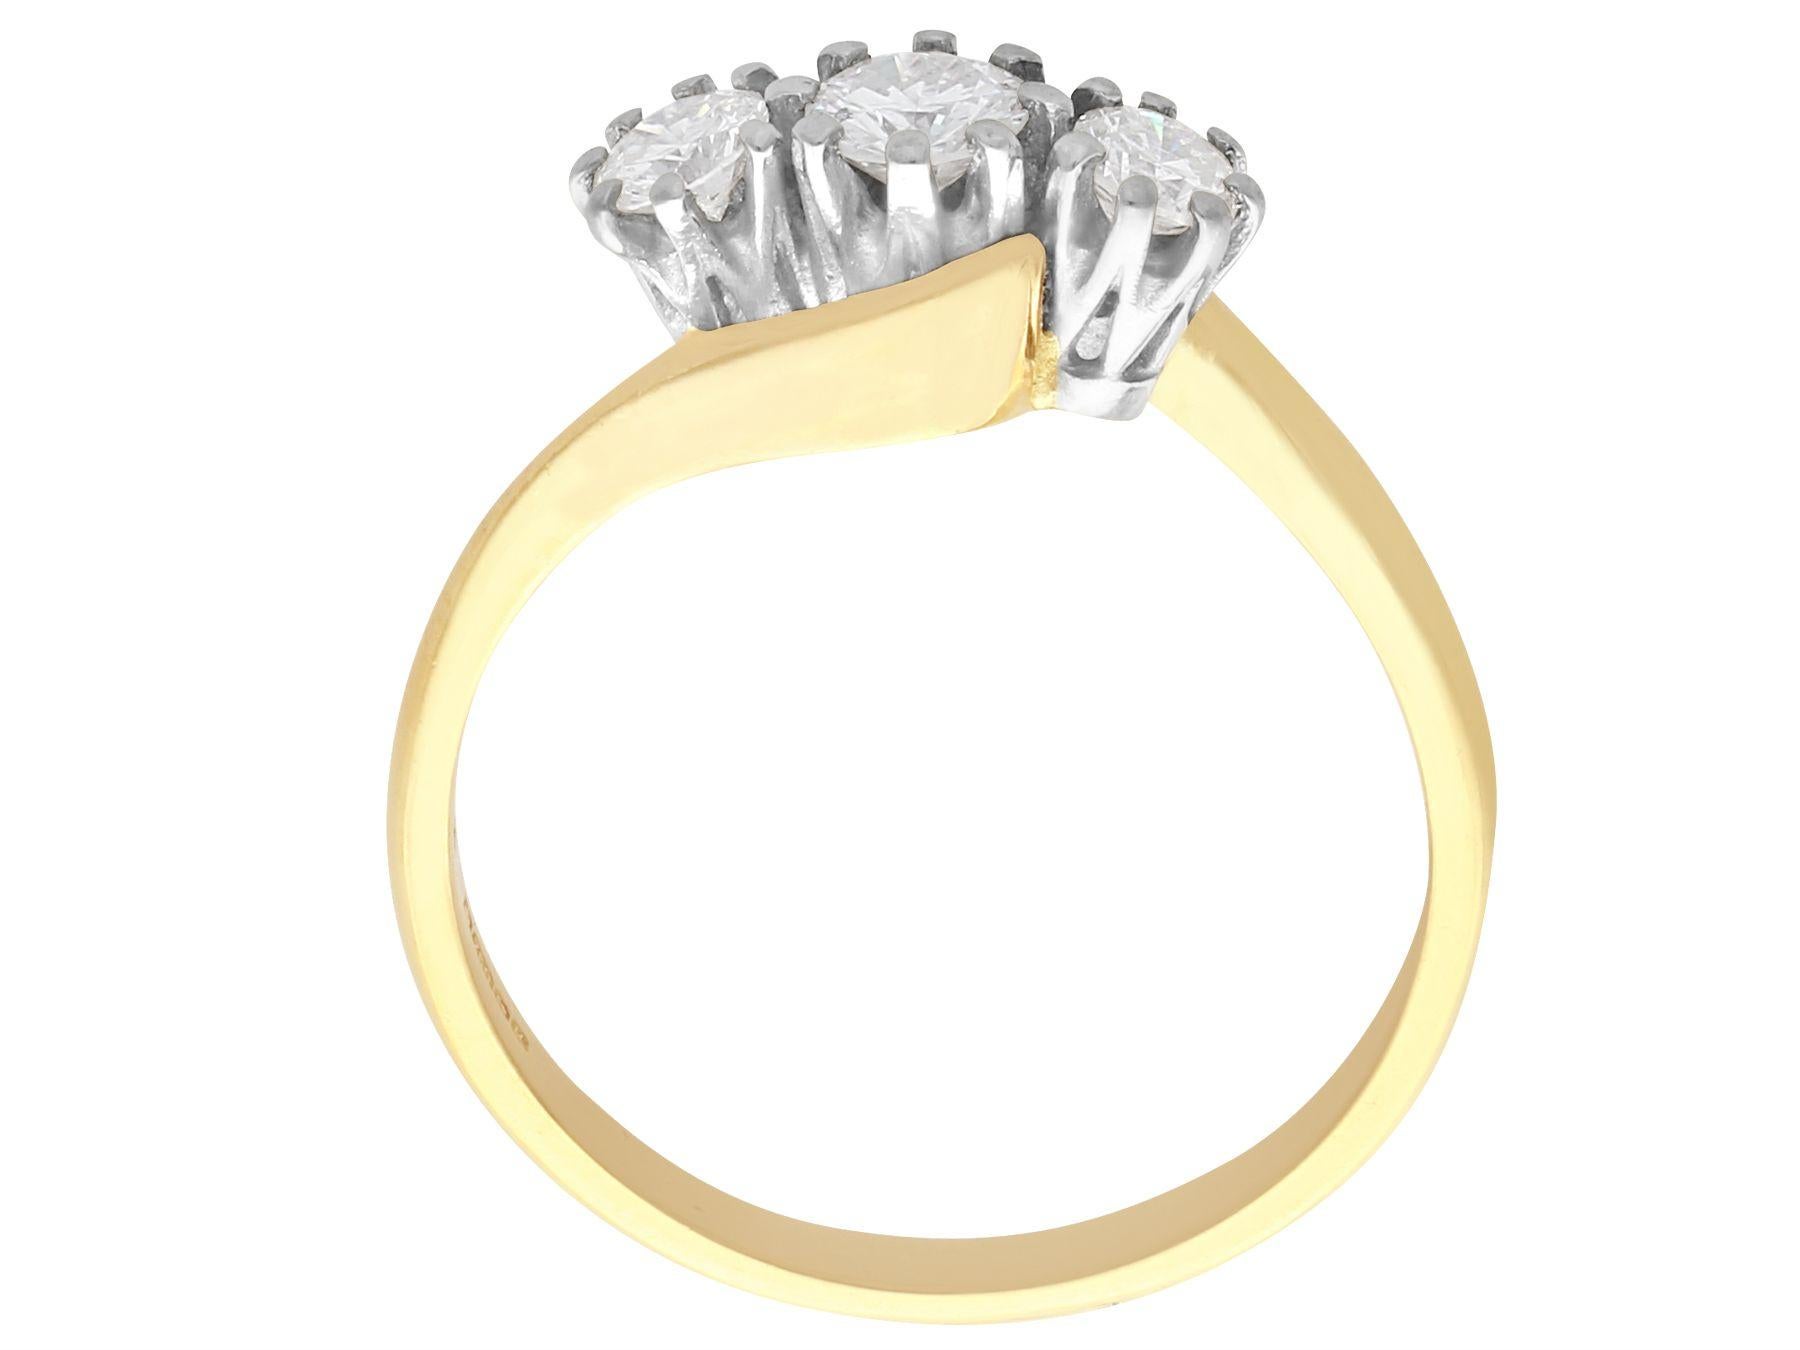 trilogy engagement ring gold